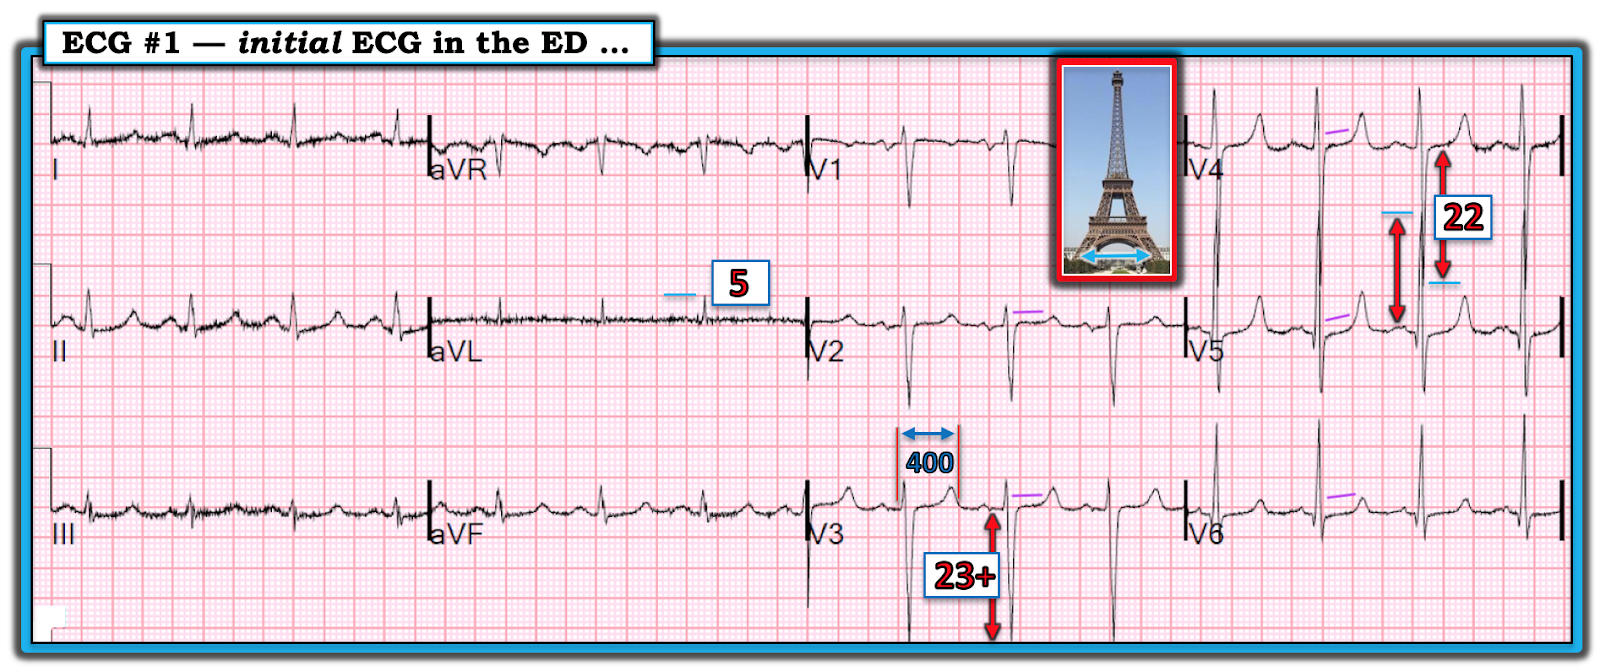 The initial ECG done in the ED (See text). 